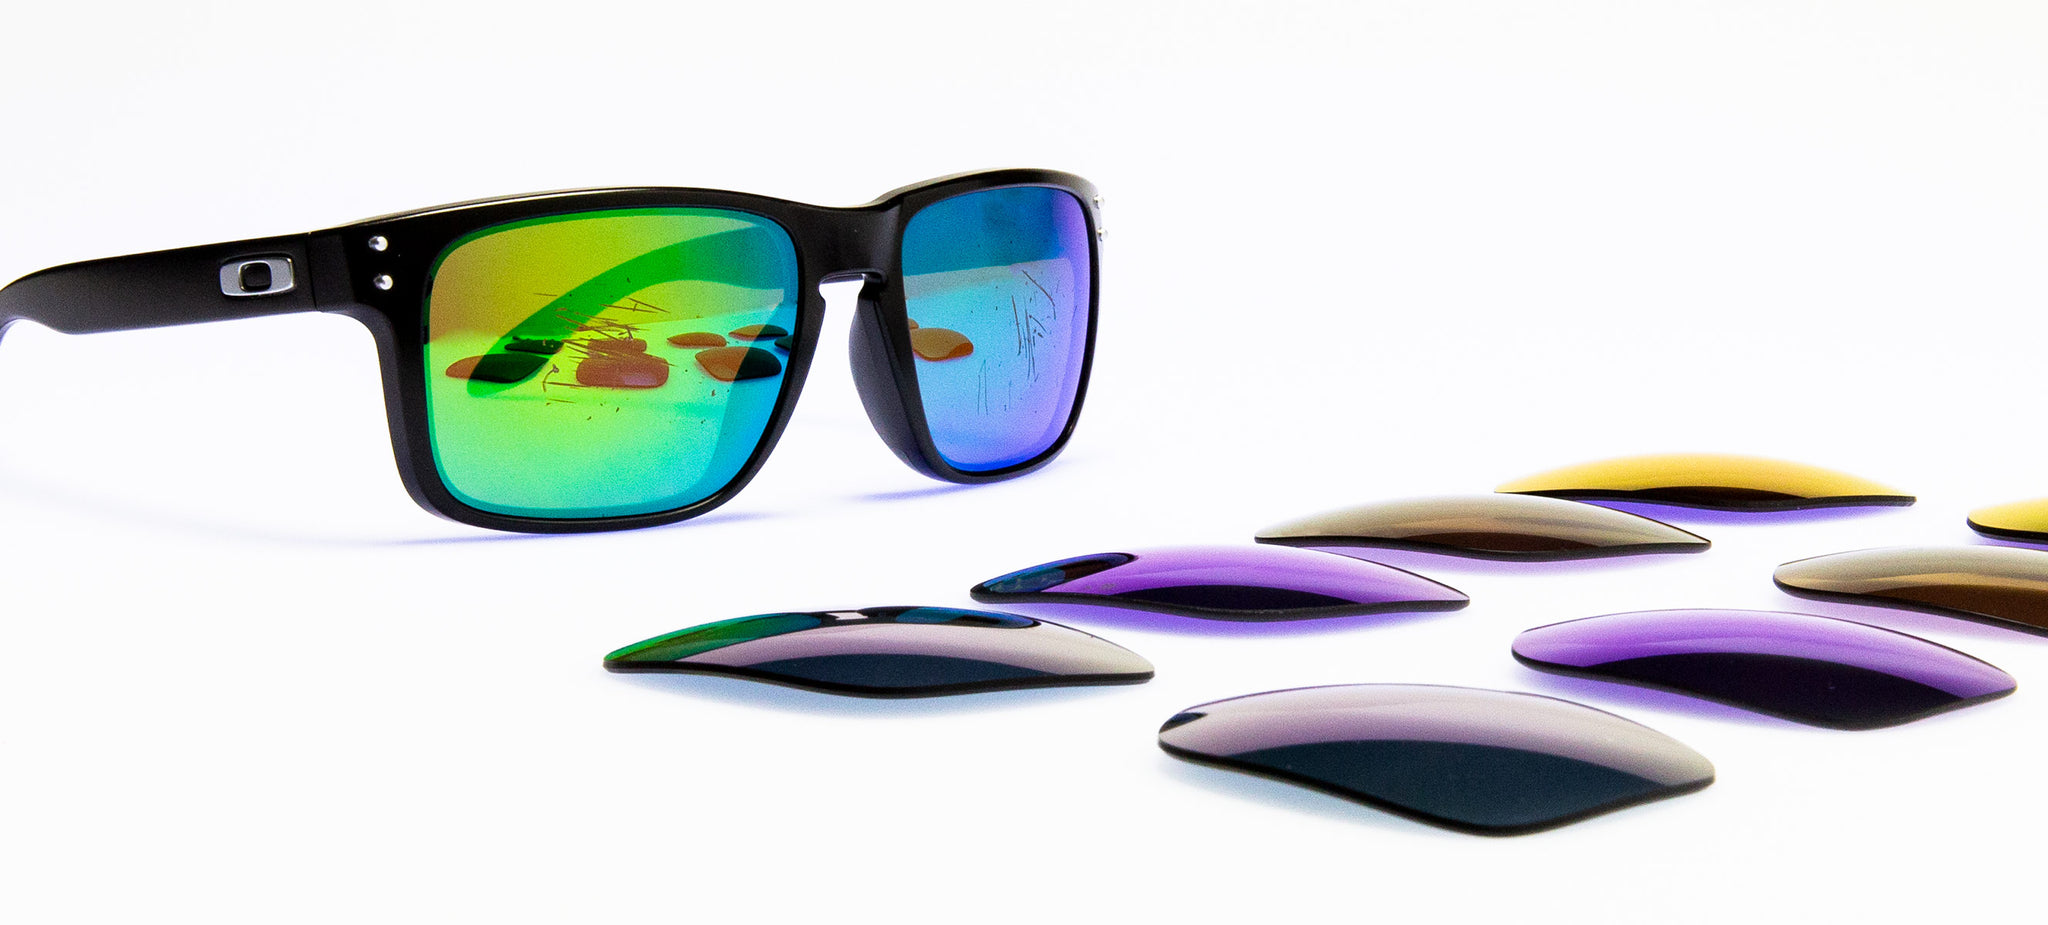 sunglasses with assorted replacement lenses sitting in front